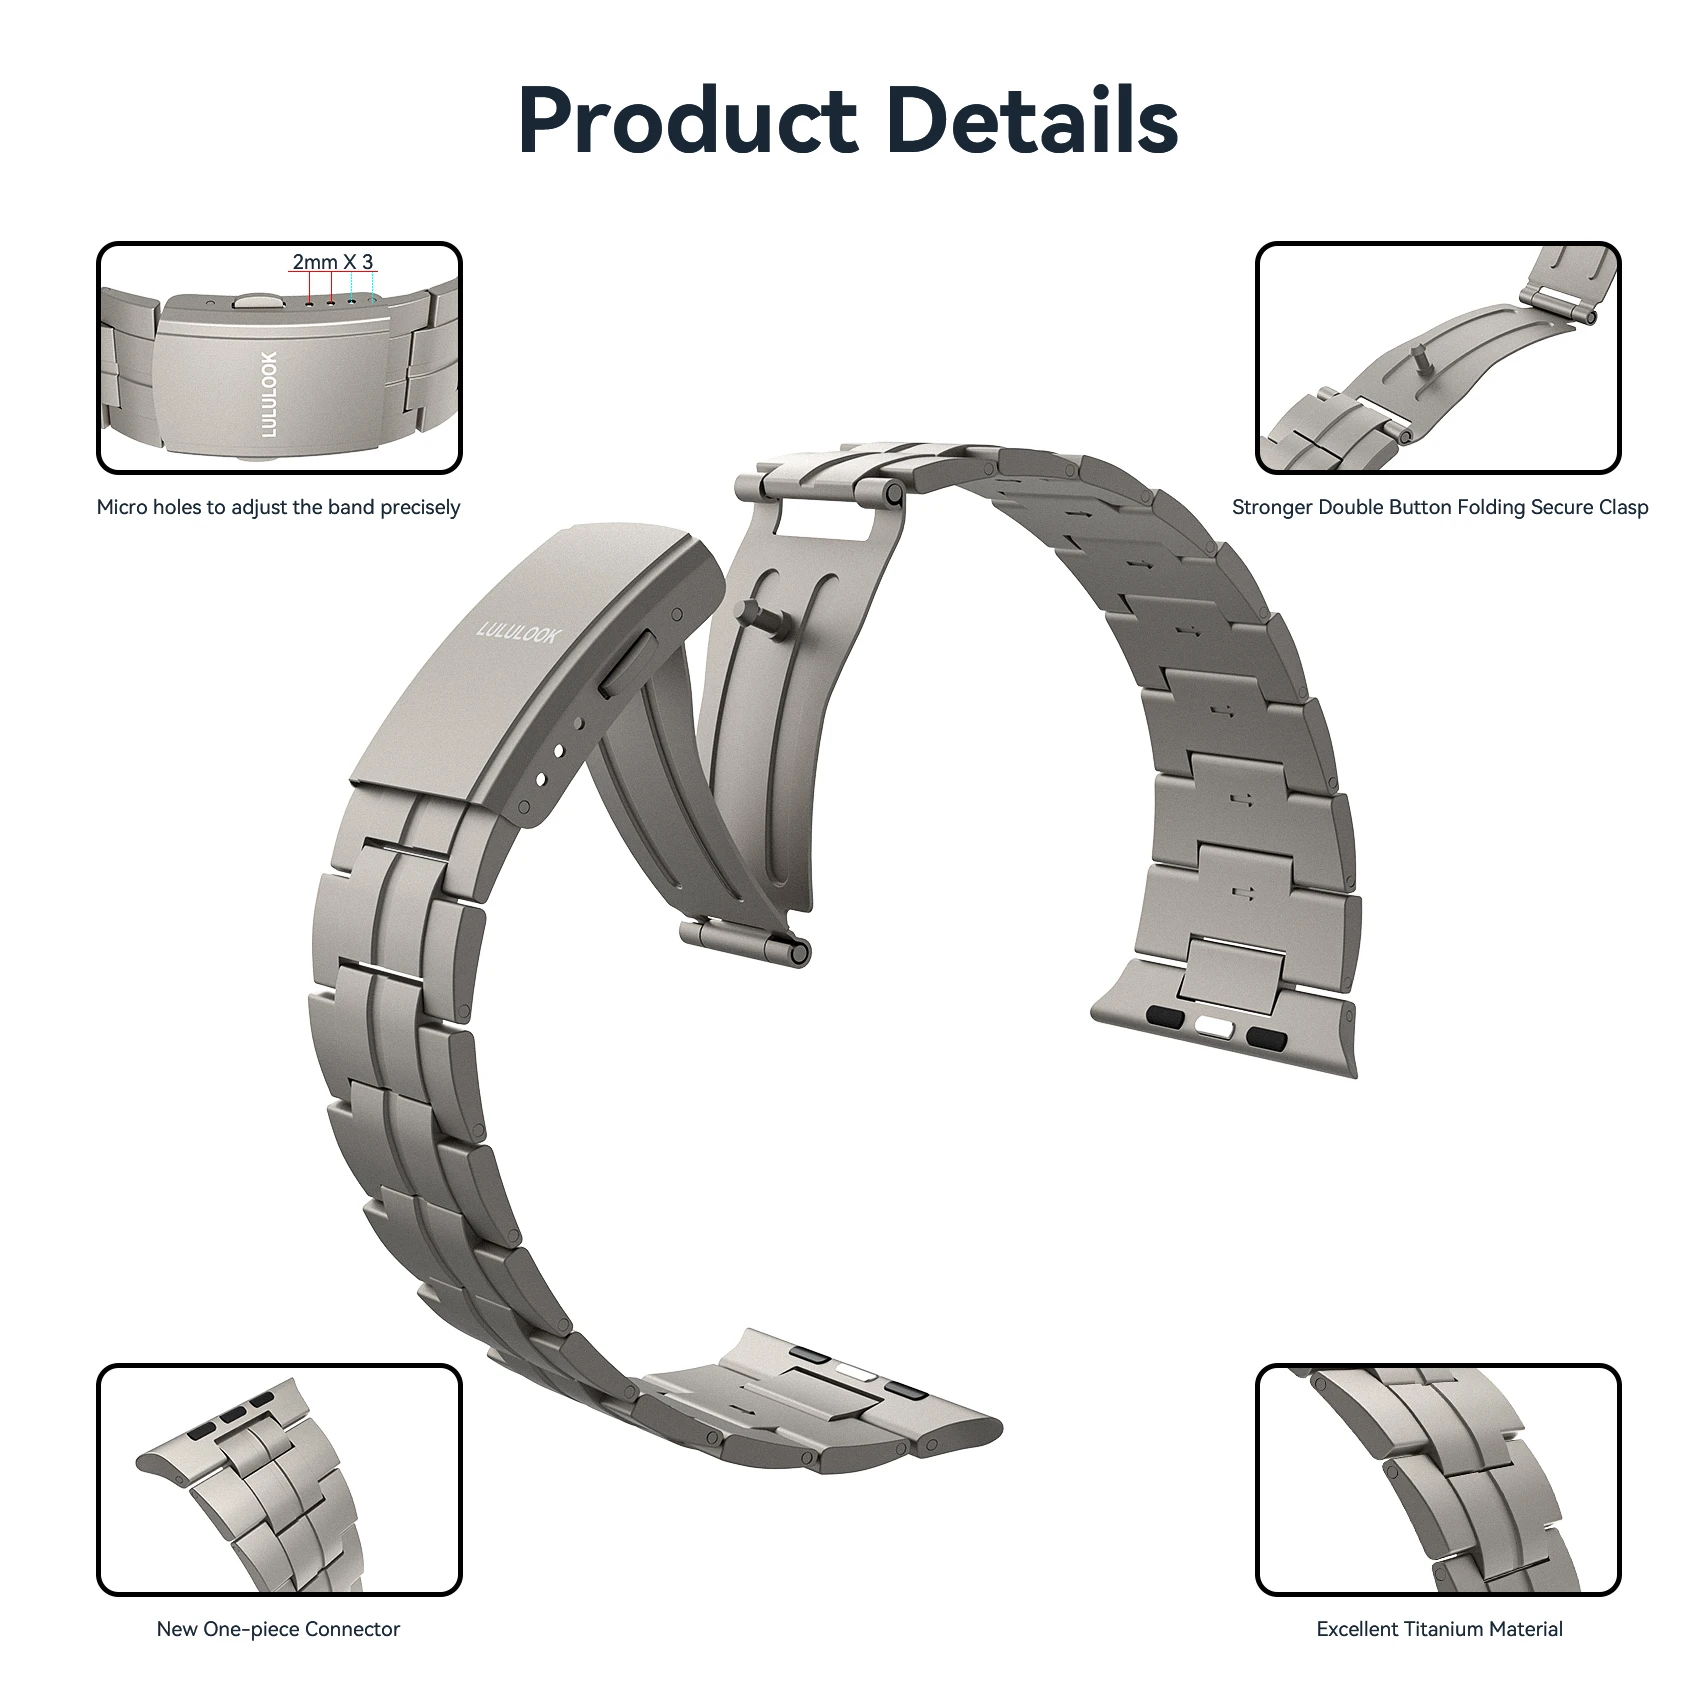  LULULOOK Band for Apple Watch Ultra, 49MM Titanium Metal Link  Bracelet [𝘿𝙞𝙖𝙢𝙤𝙣𝙙-𝙡𝙞𝙠𝙚 𝘾𝙖𝙧𝙗𝙤𝙣 𝘾𝙤𝙖𝙩𝙞𝙣𝙜] for iWatch -  Titanium Color : Cell Phones & Accessories